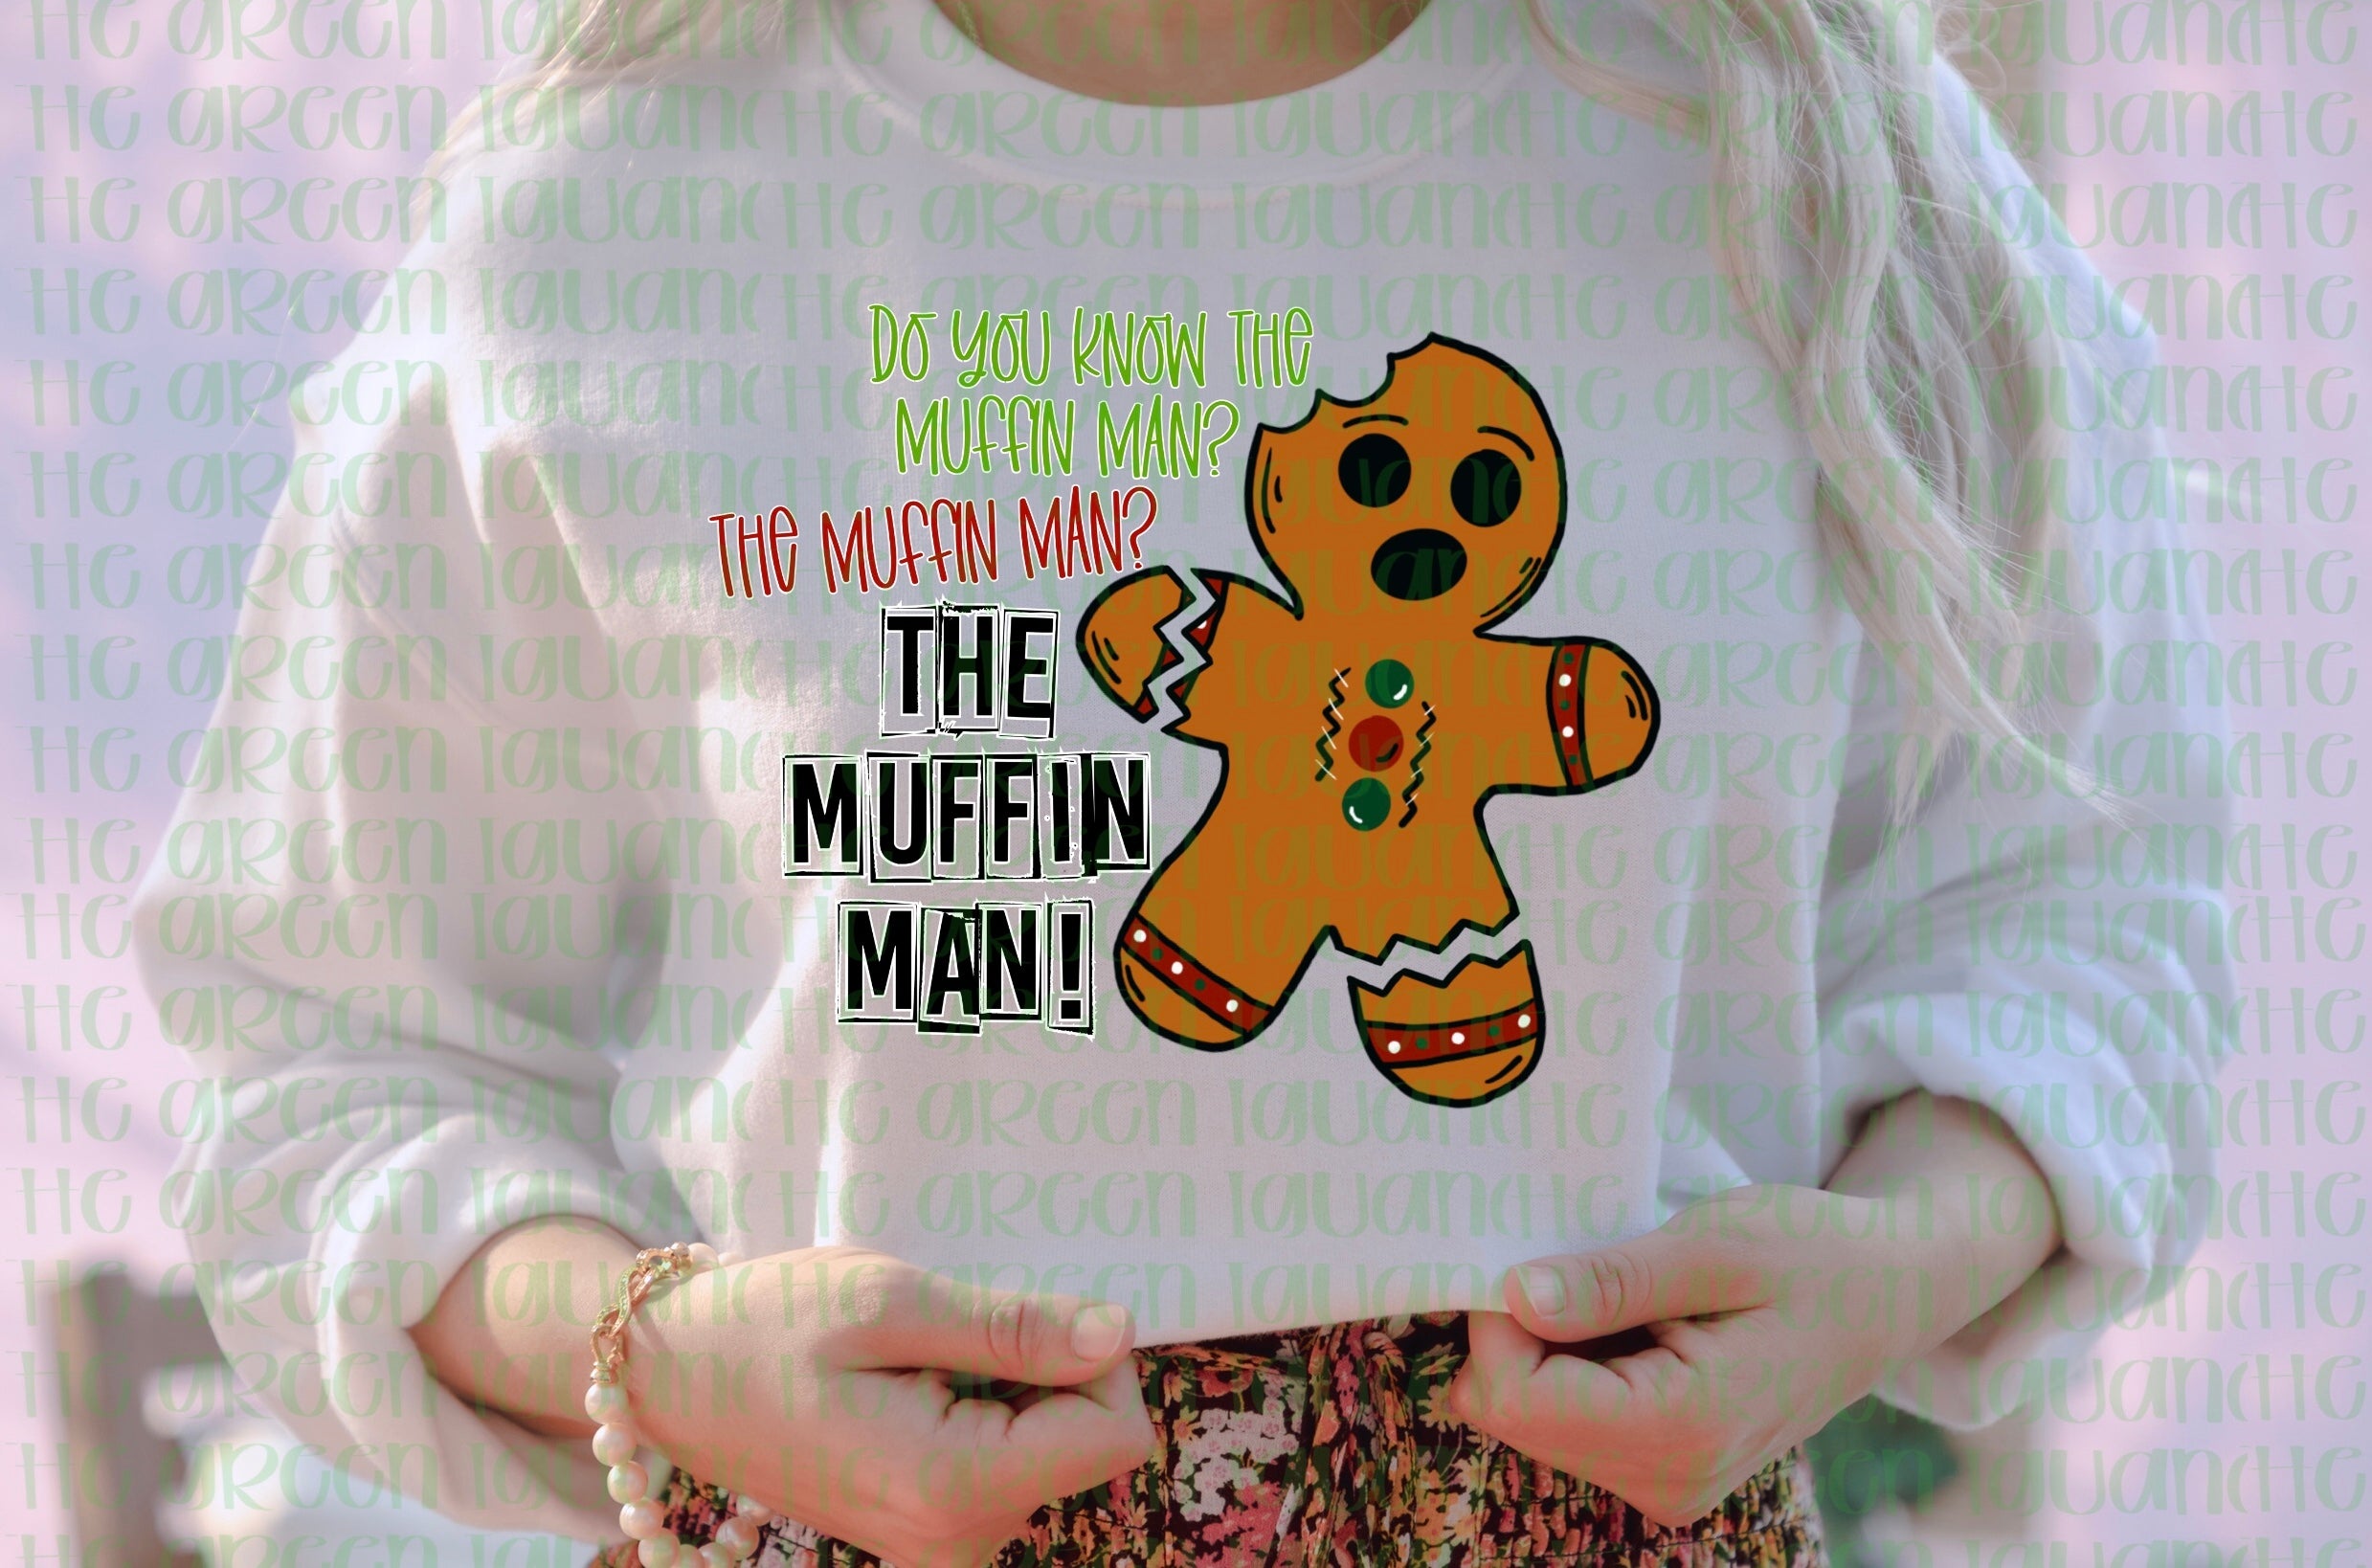 Do you know the muffin man? - DIGITAL